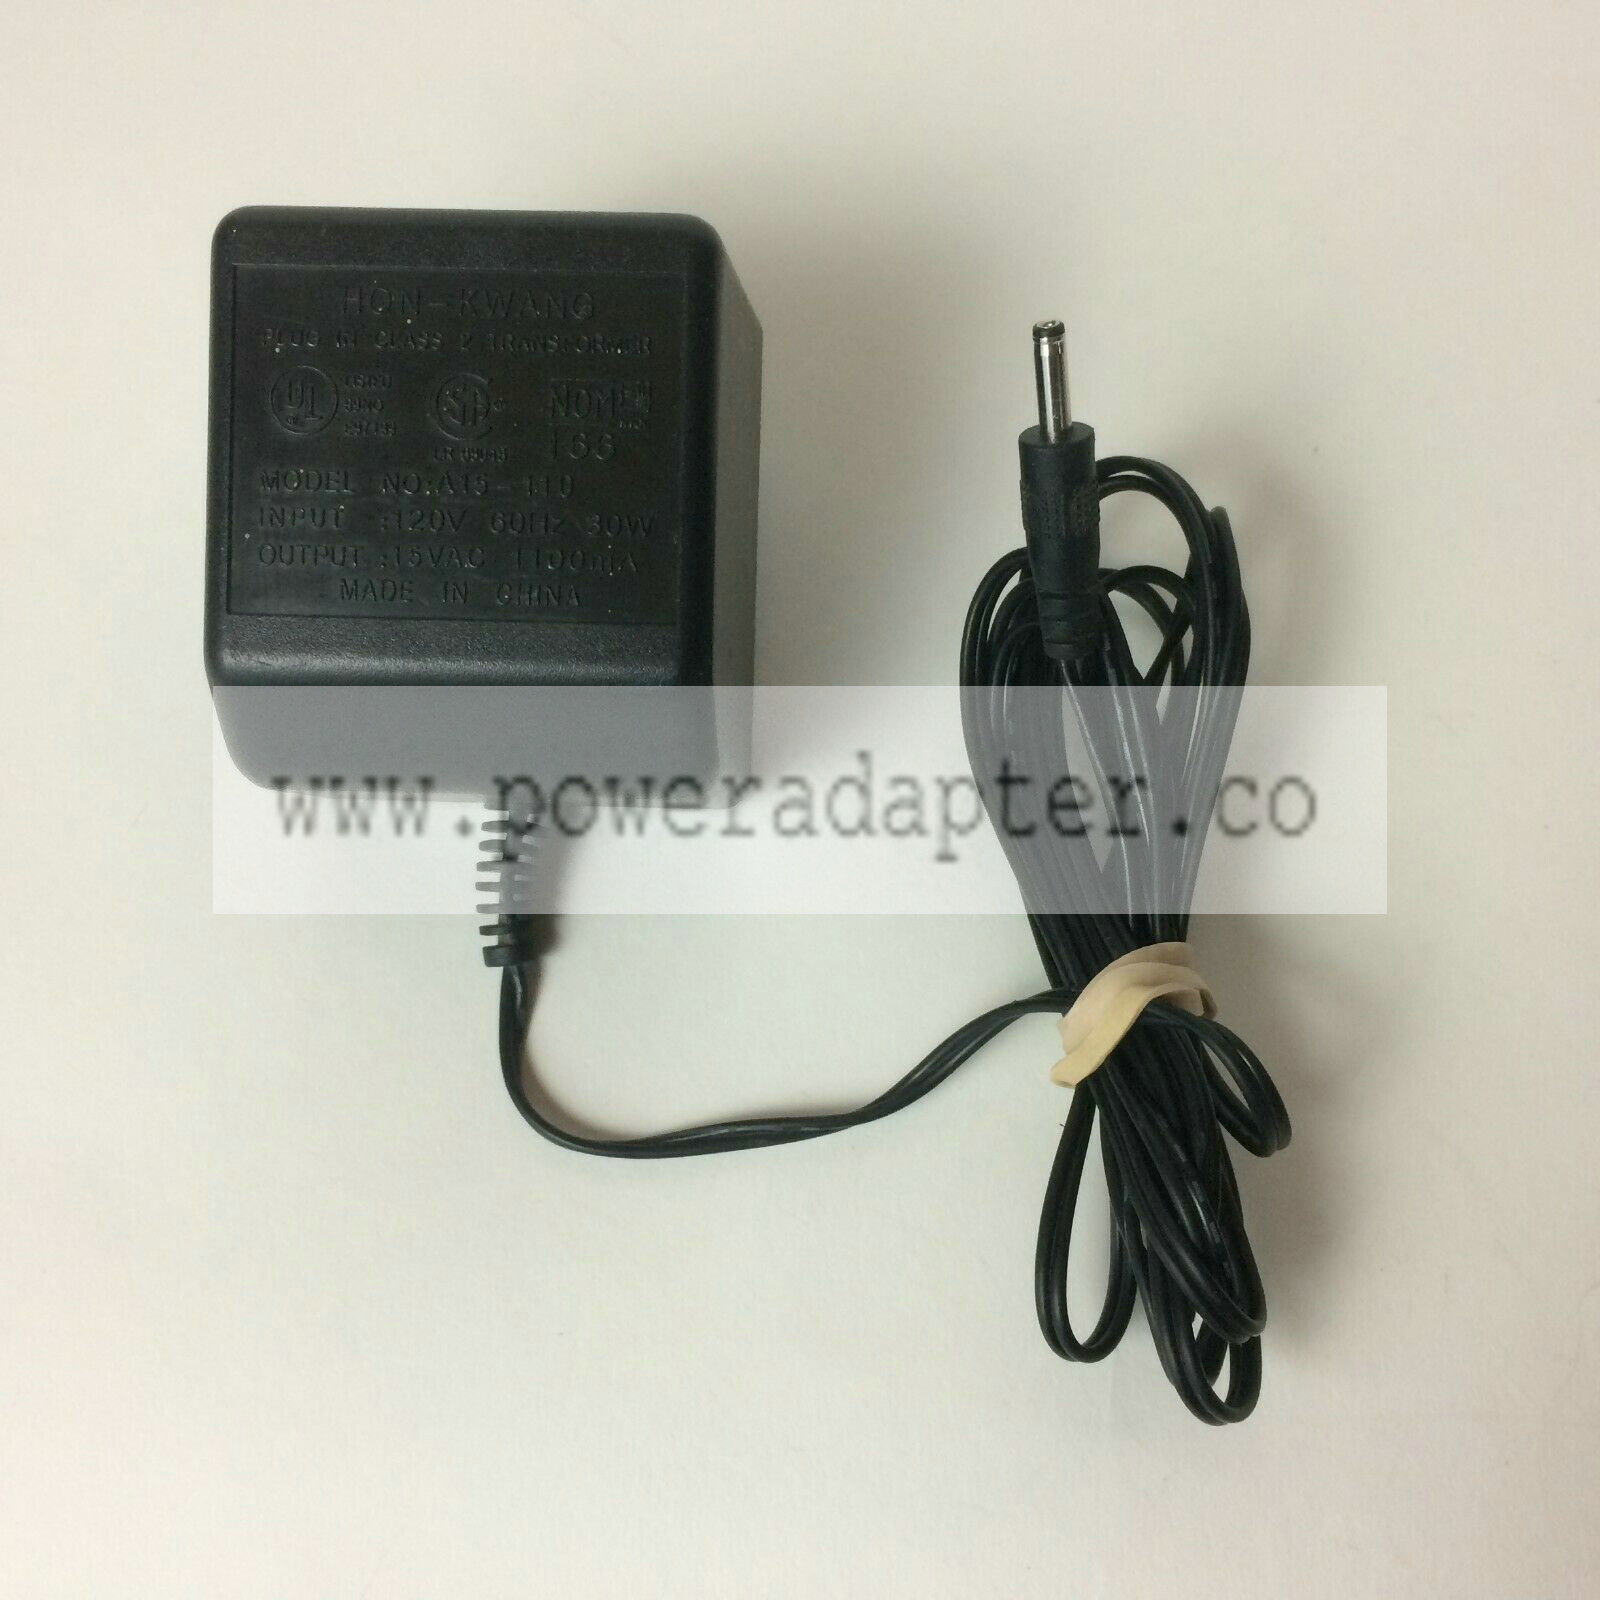 Hon Kwang Power Adapter Charger AC Supply 15V AC 1100mA Class 2 Model # A115-110 MPN: A15-110 Modified Item: No Outp - Click Image to Close